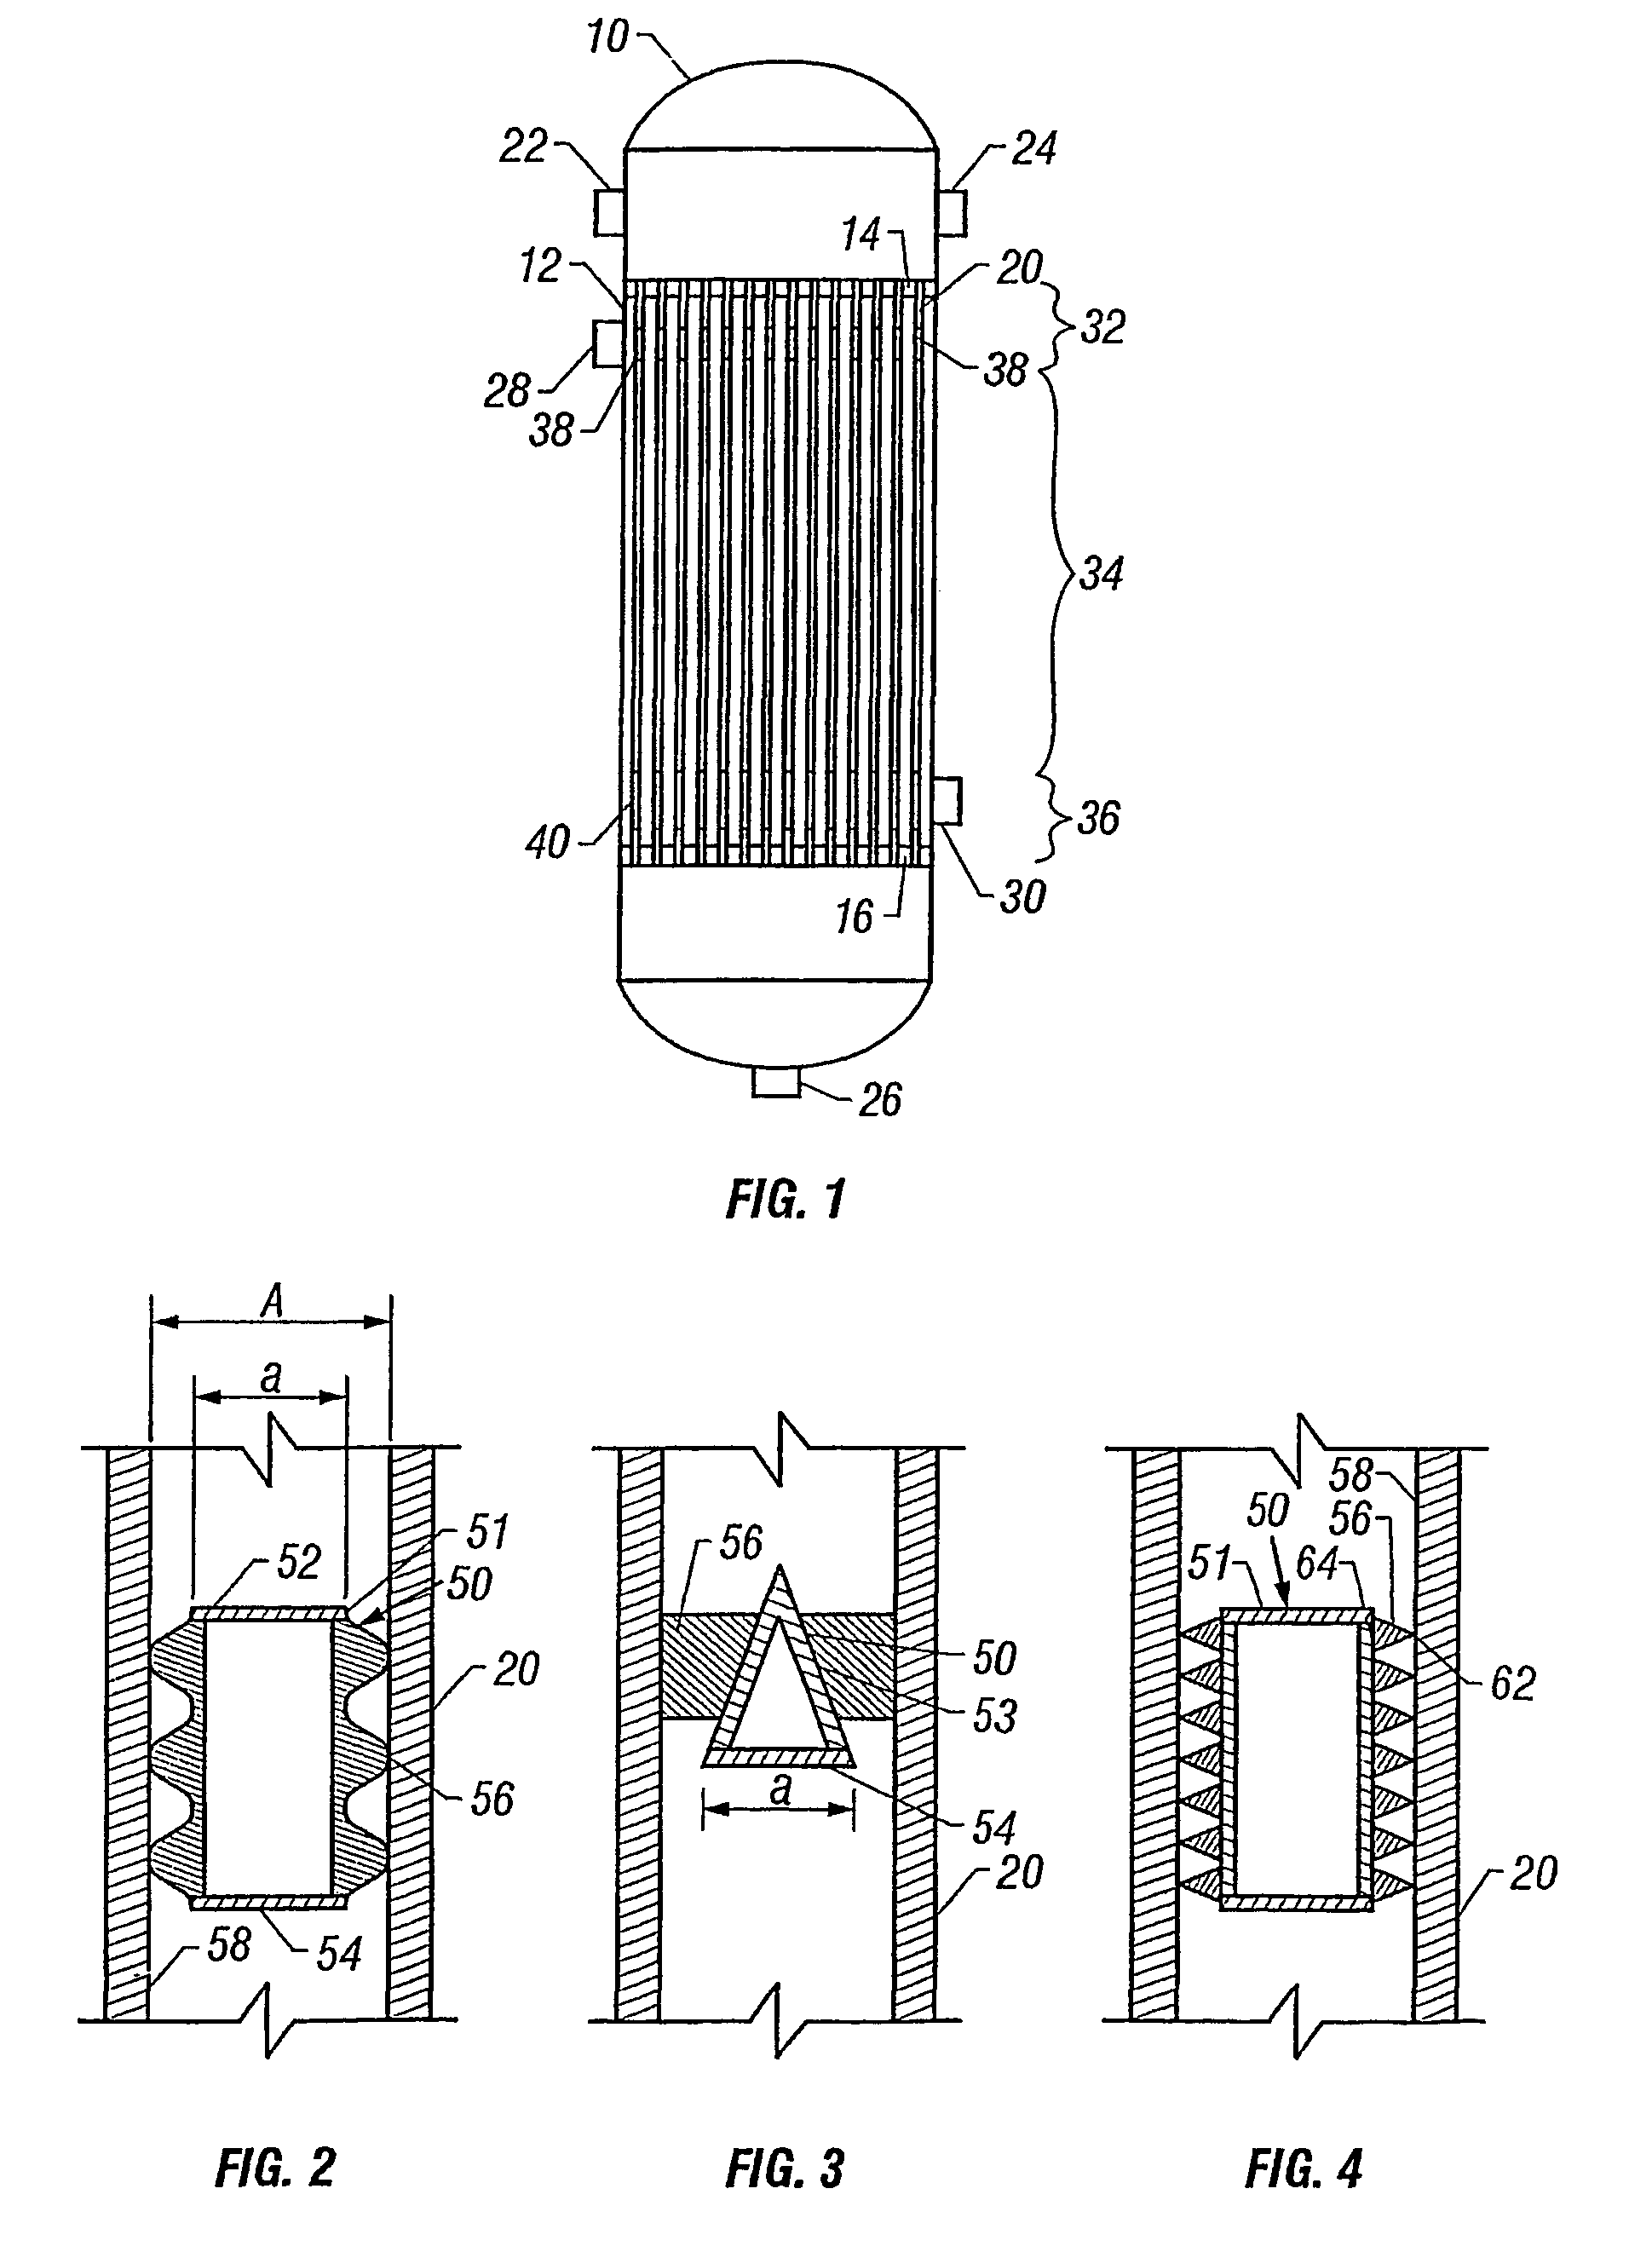 Rod-shaped inserts in reactor tubes